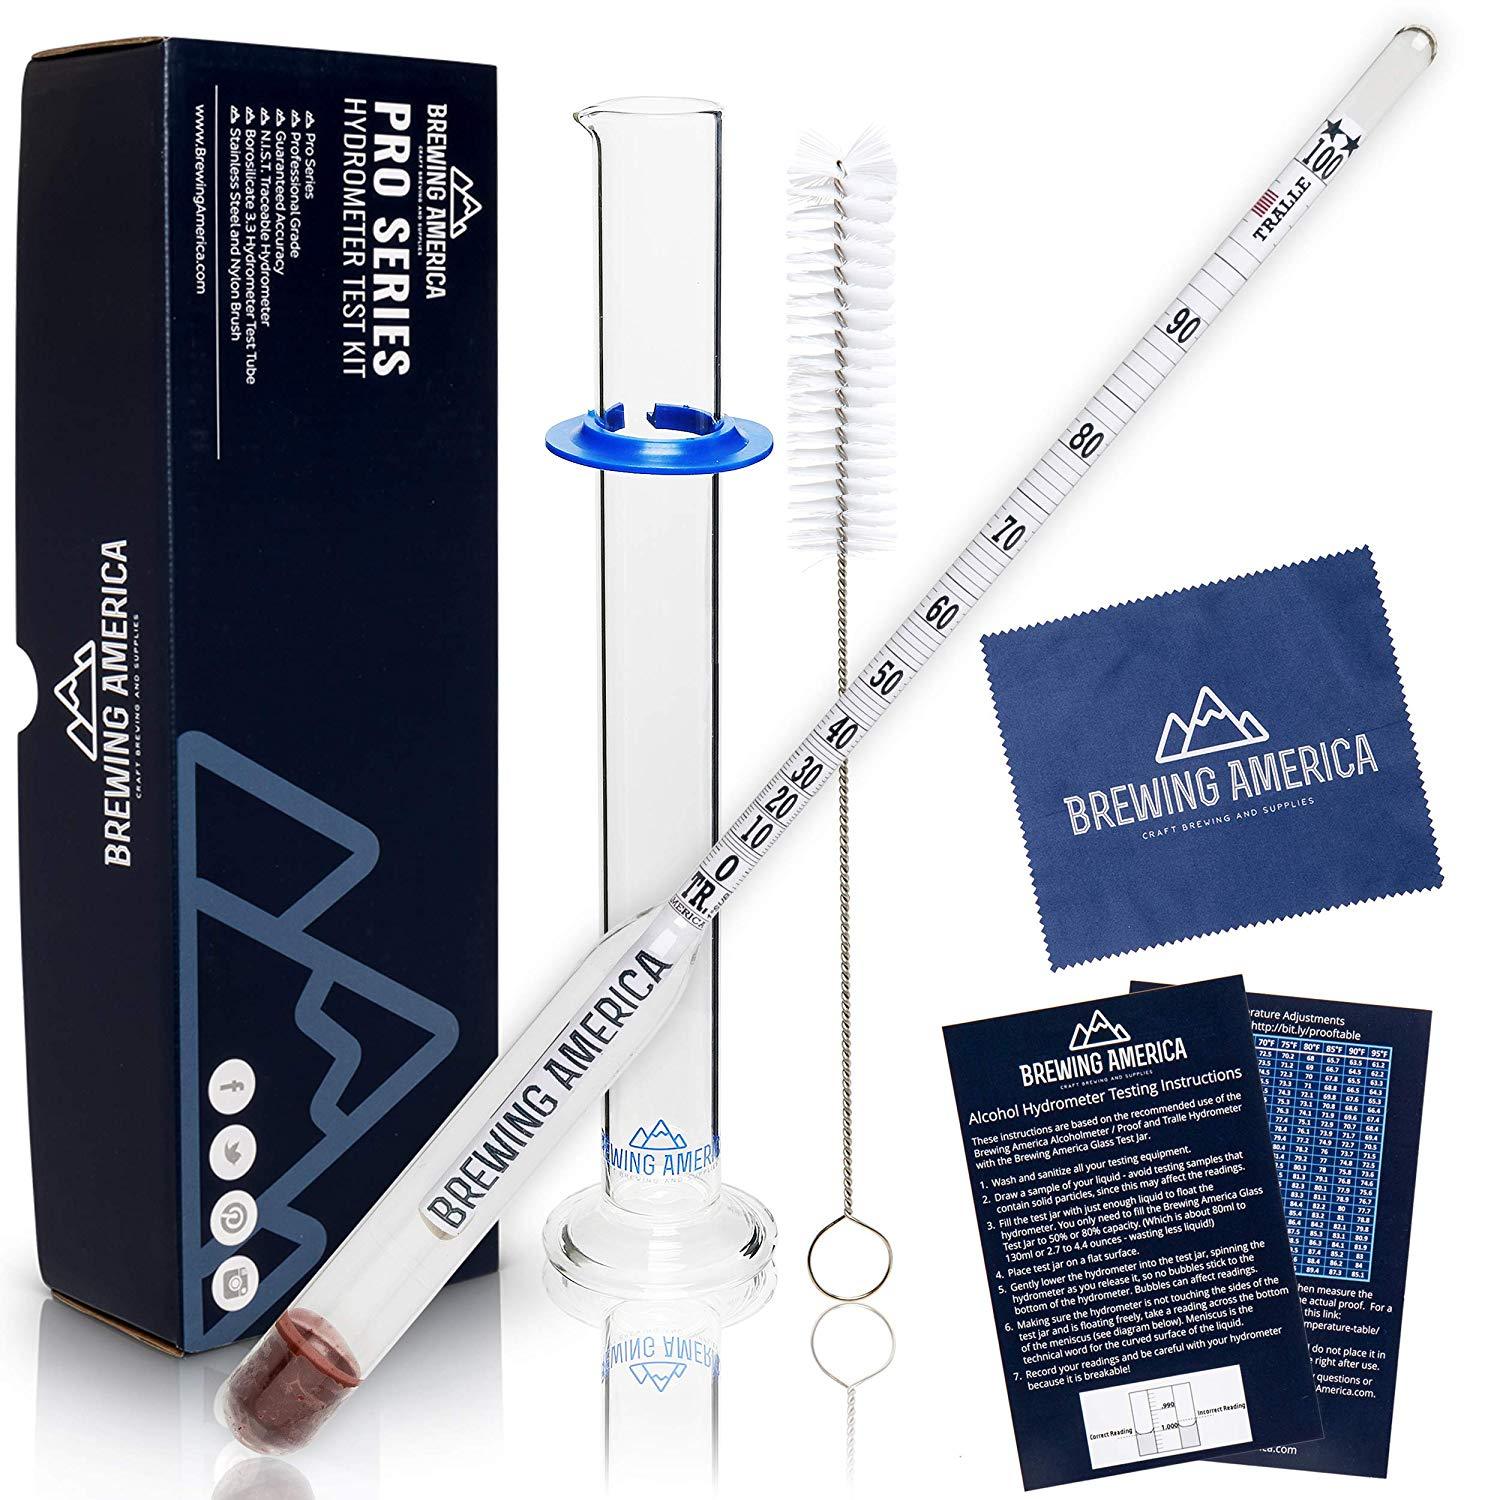 Hydrometer Alcohol Meter Test Kit: Distilled Alcohol American-made 0-200 Proof Pro Series Traceable Alcoholmeter Tester Set with Glass Jar